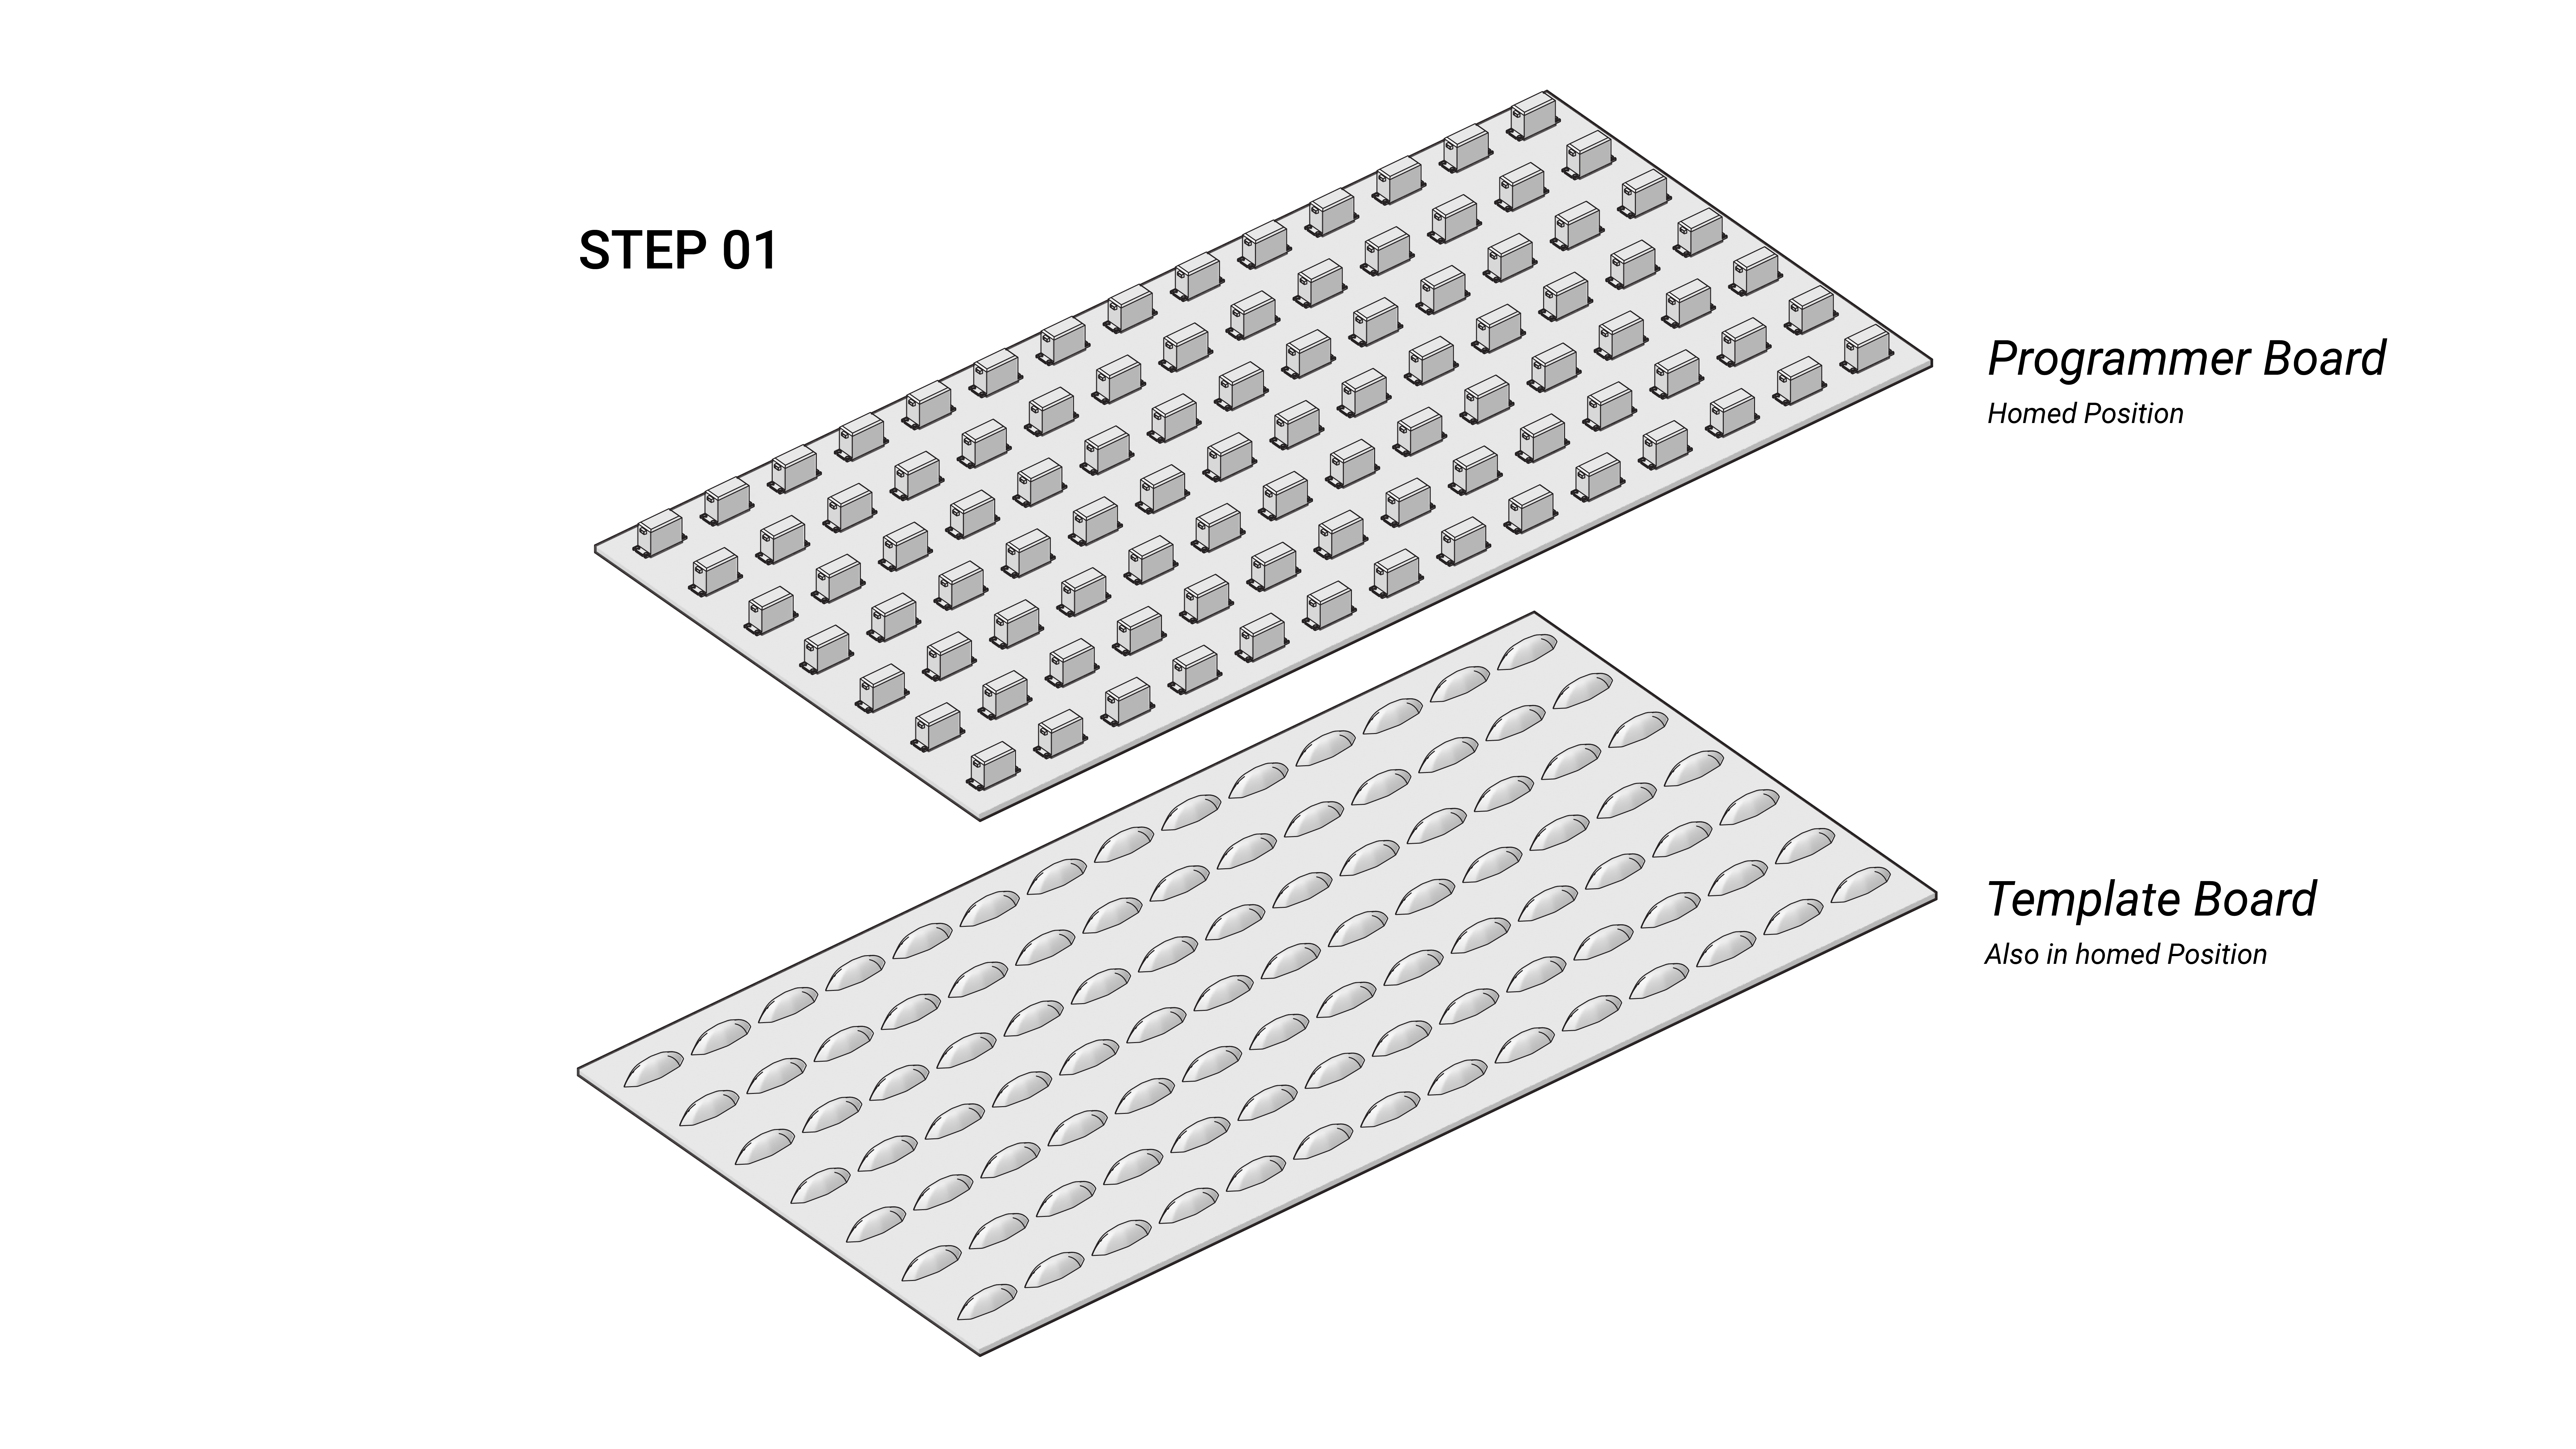 Diagram of step 1 of the MATS workflow, programmer and template boards in home positions